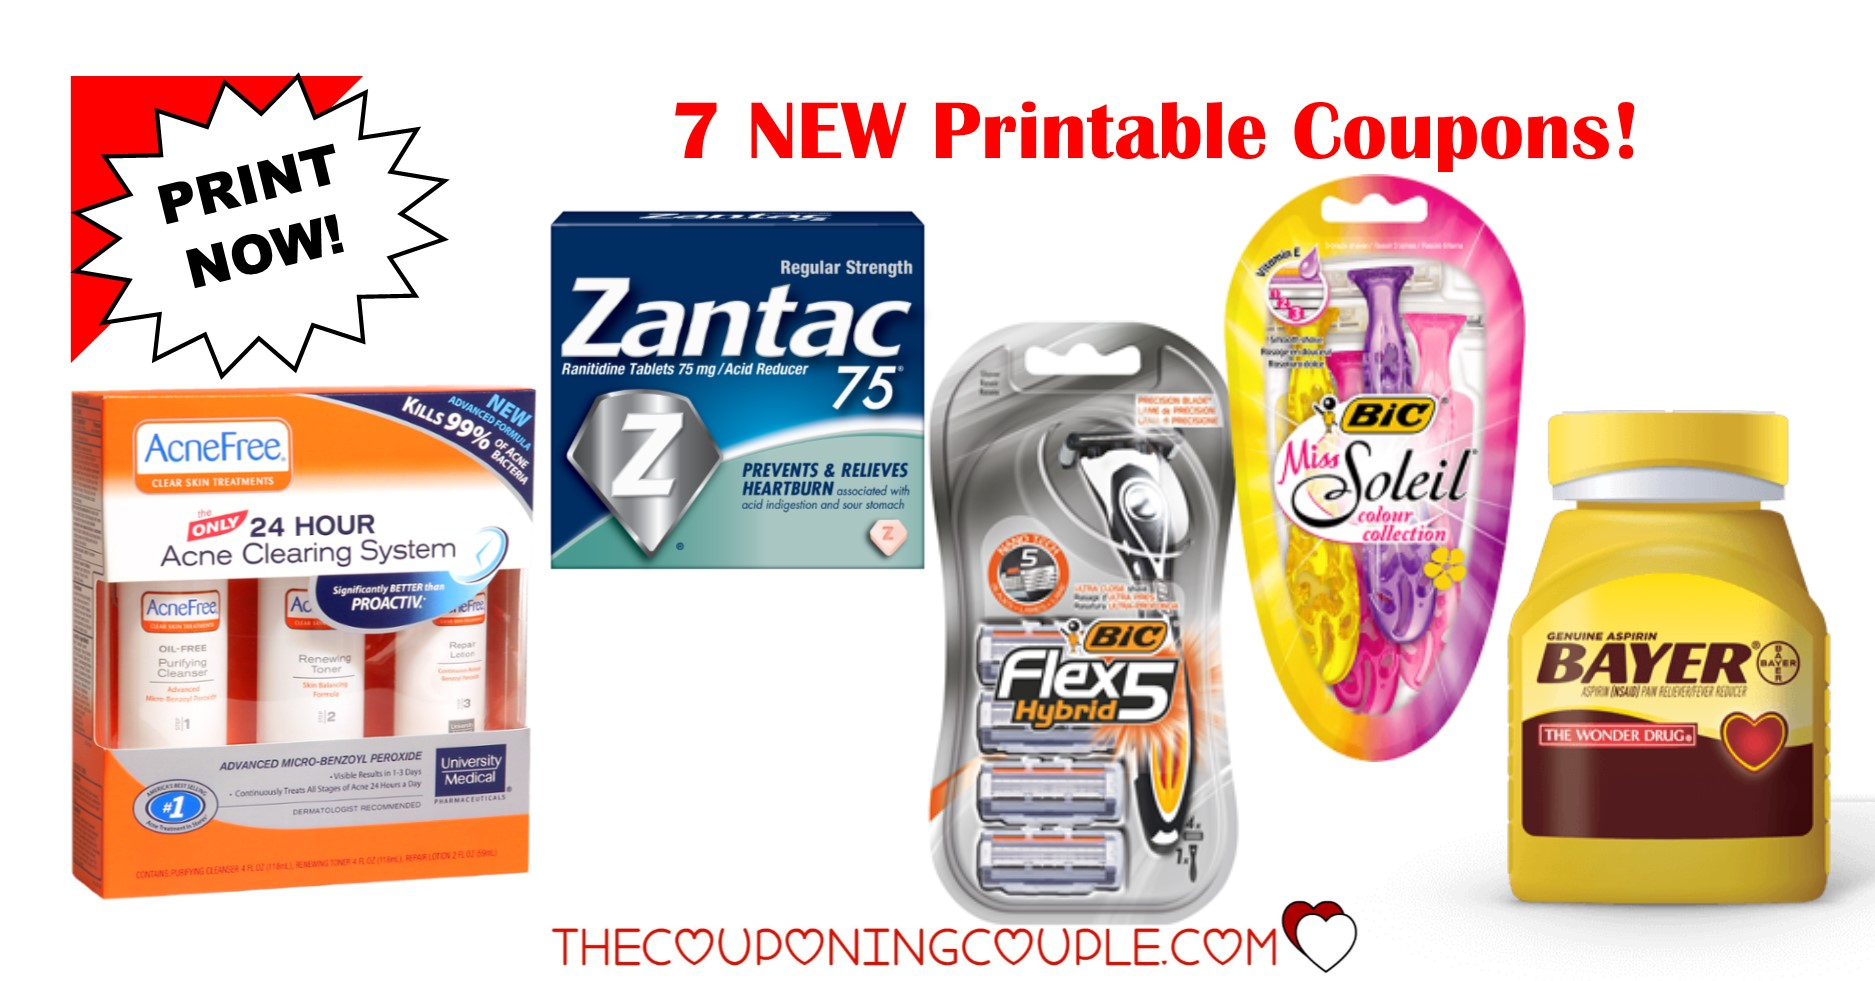 7 New Printable Coupons ~ $21 In Savings! Print Now! - Acne Free Coupons Printable